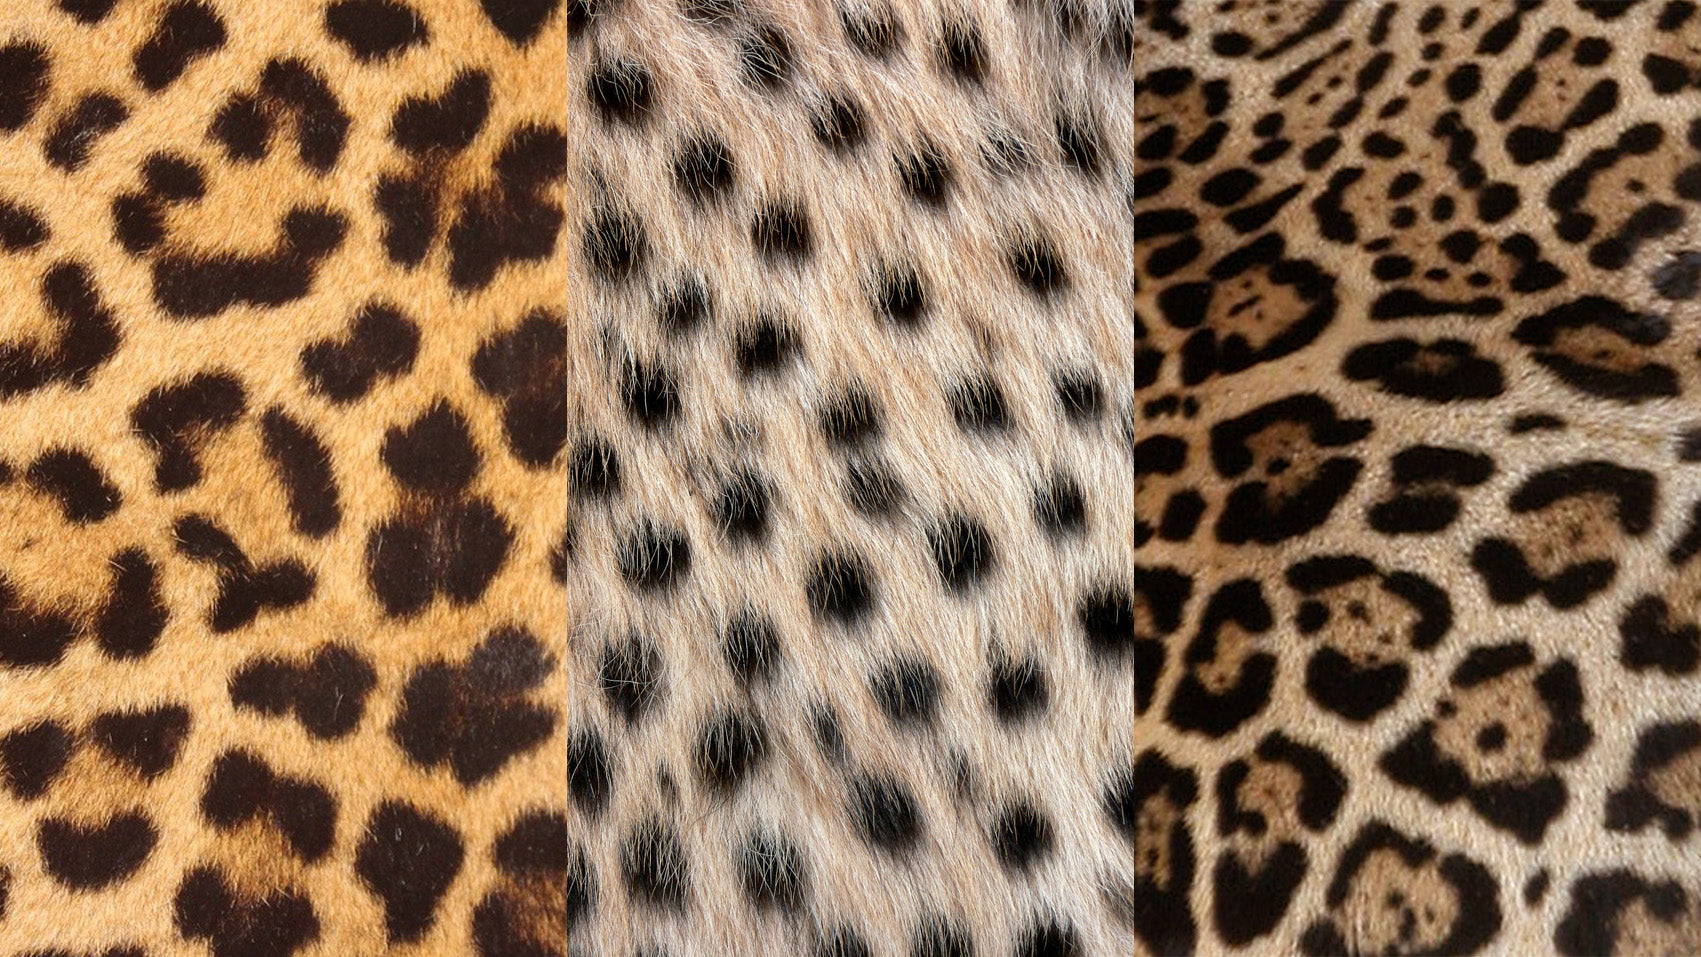 Read all about the difference between leopard, jaguar and cheetah